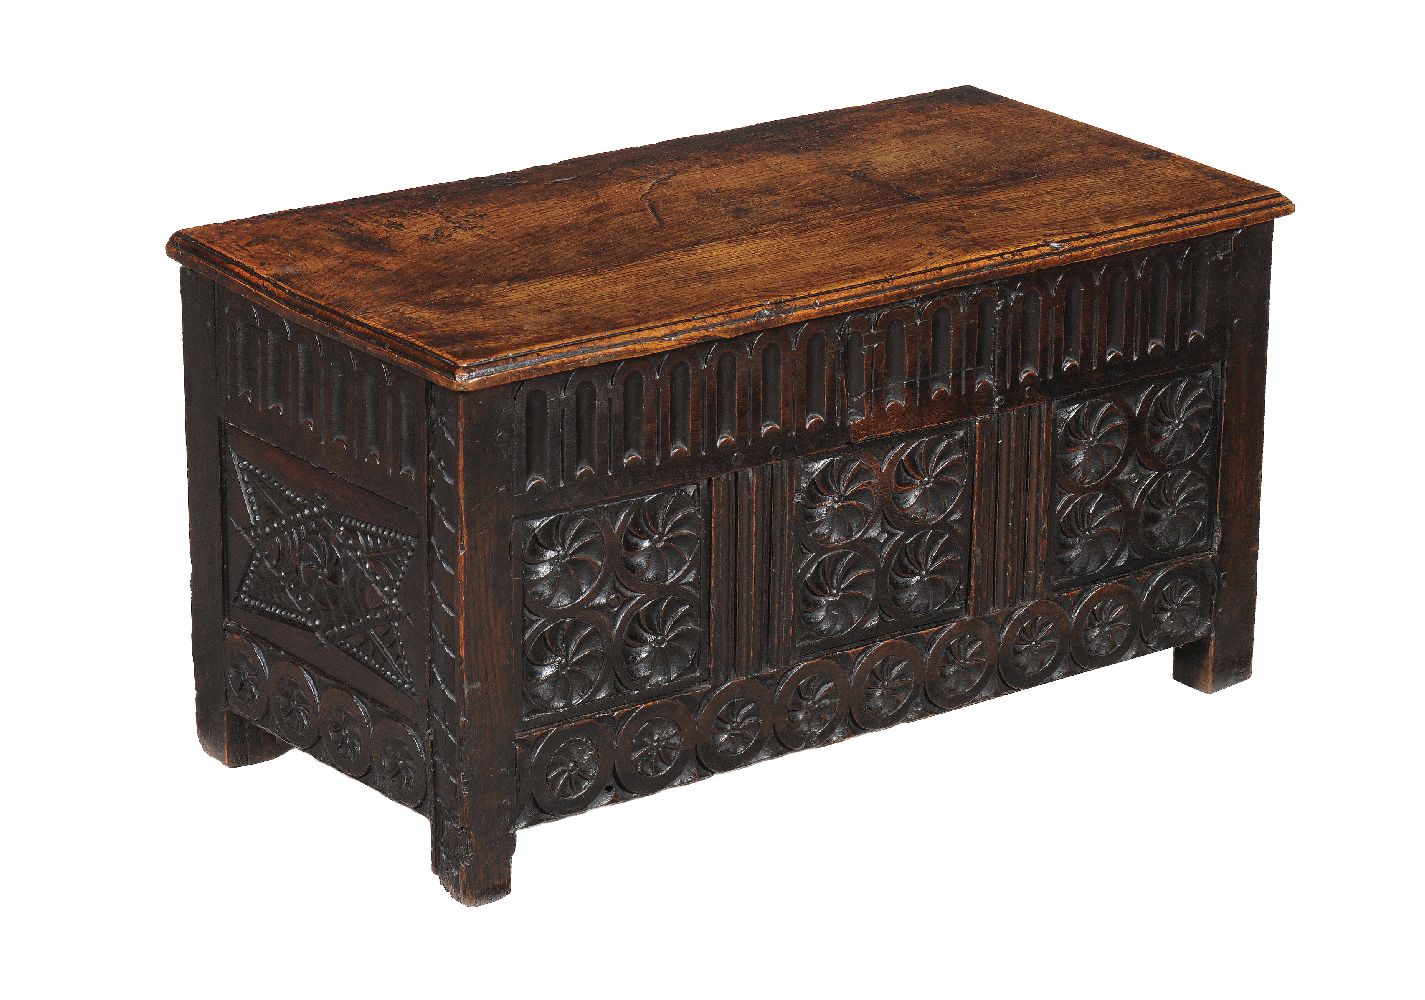 A Charles II panelled oak chest, circa 1660, of small proportions, the hinged lid above the fluted